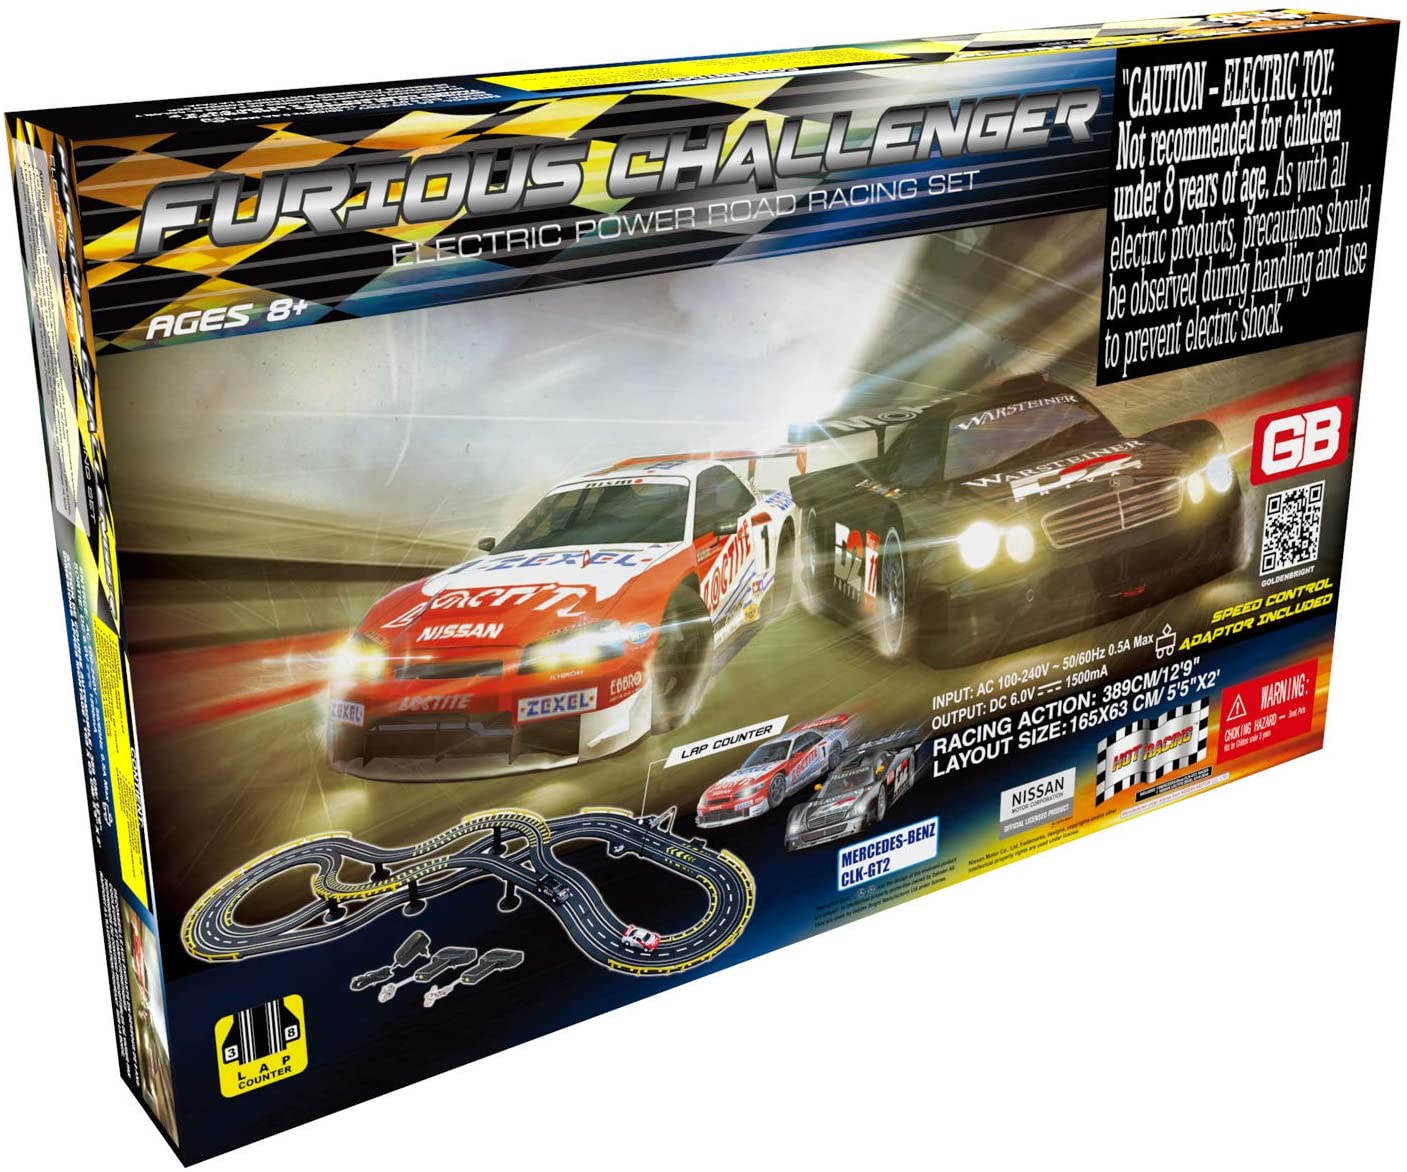 GB 6653 Furious Challenger Electric Power Road Racing Set